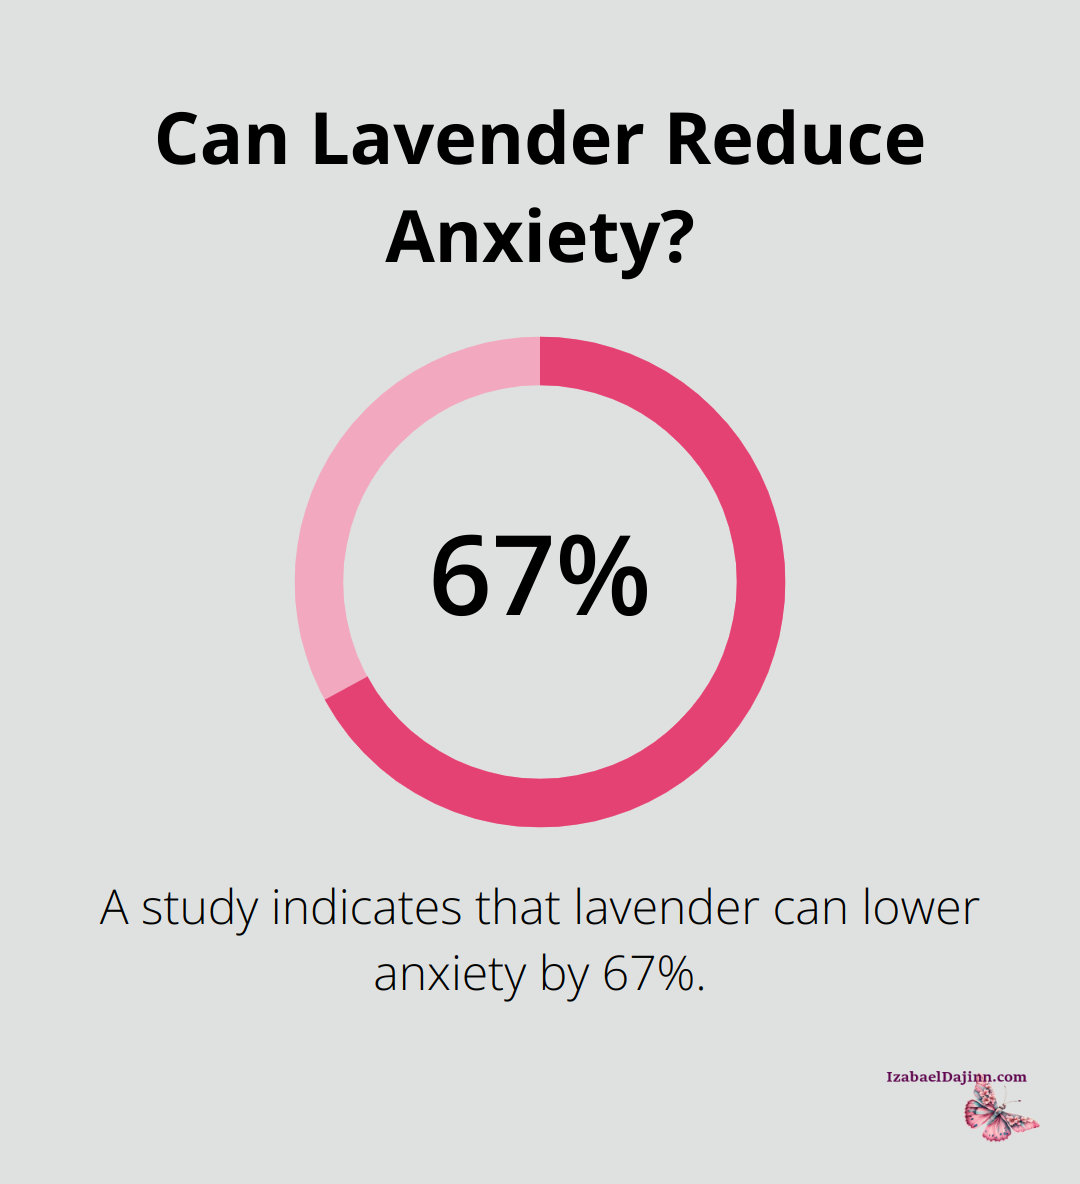 Can Lavender Reduce Anxiety?